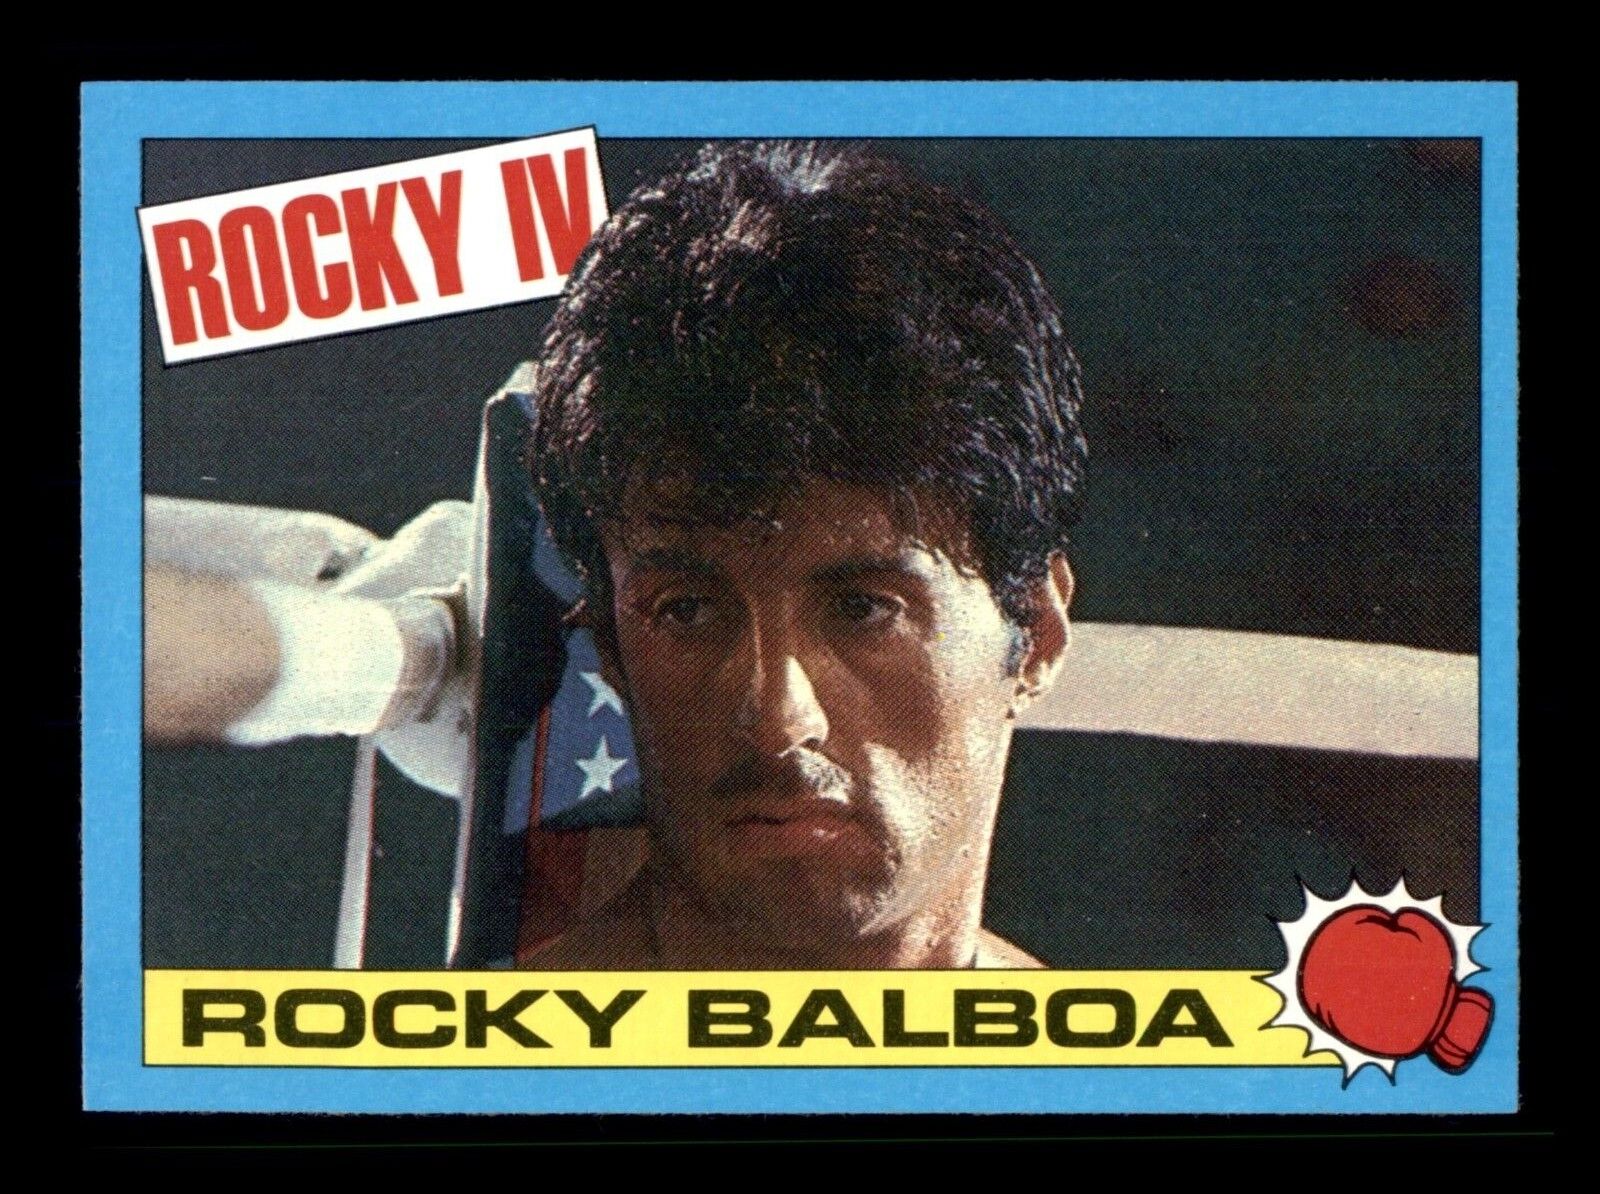 1985 TOPPS ROCKY 4 CARDS & STICKERS / SEE DROP DOWN MENU 4 CARD U WILL RECEIVE